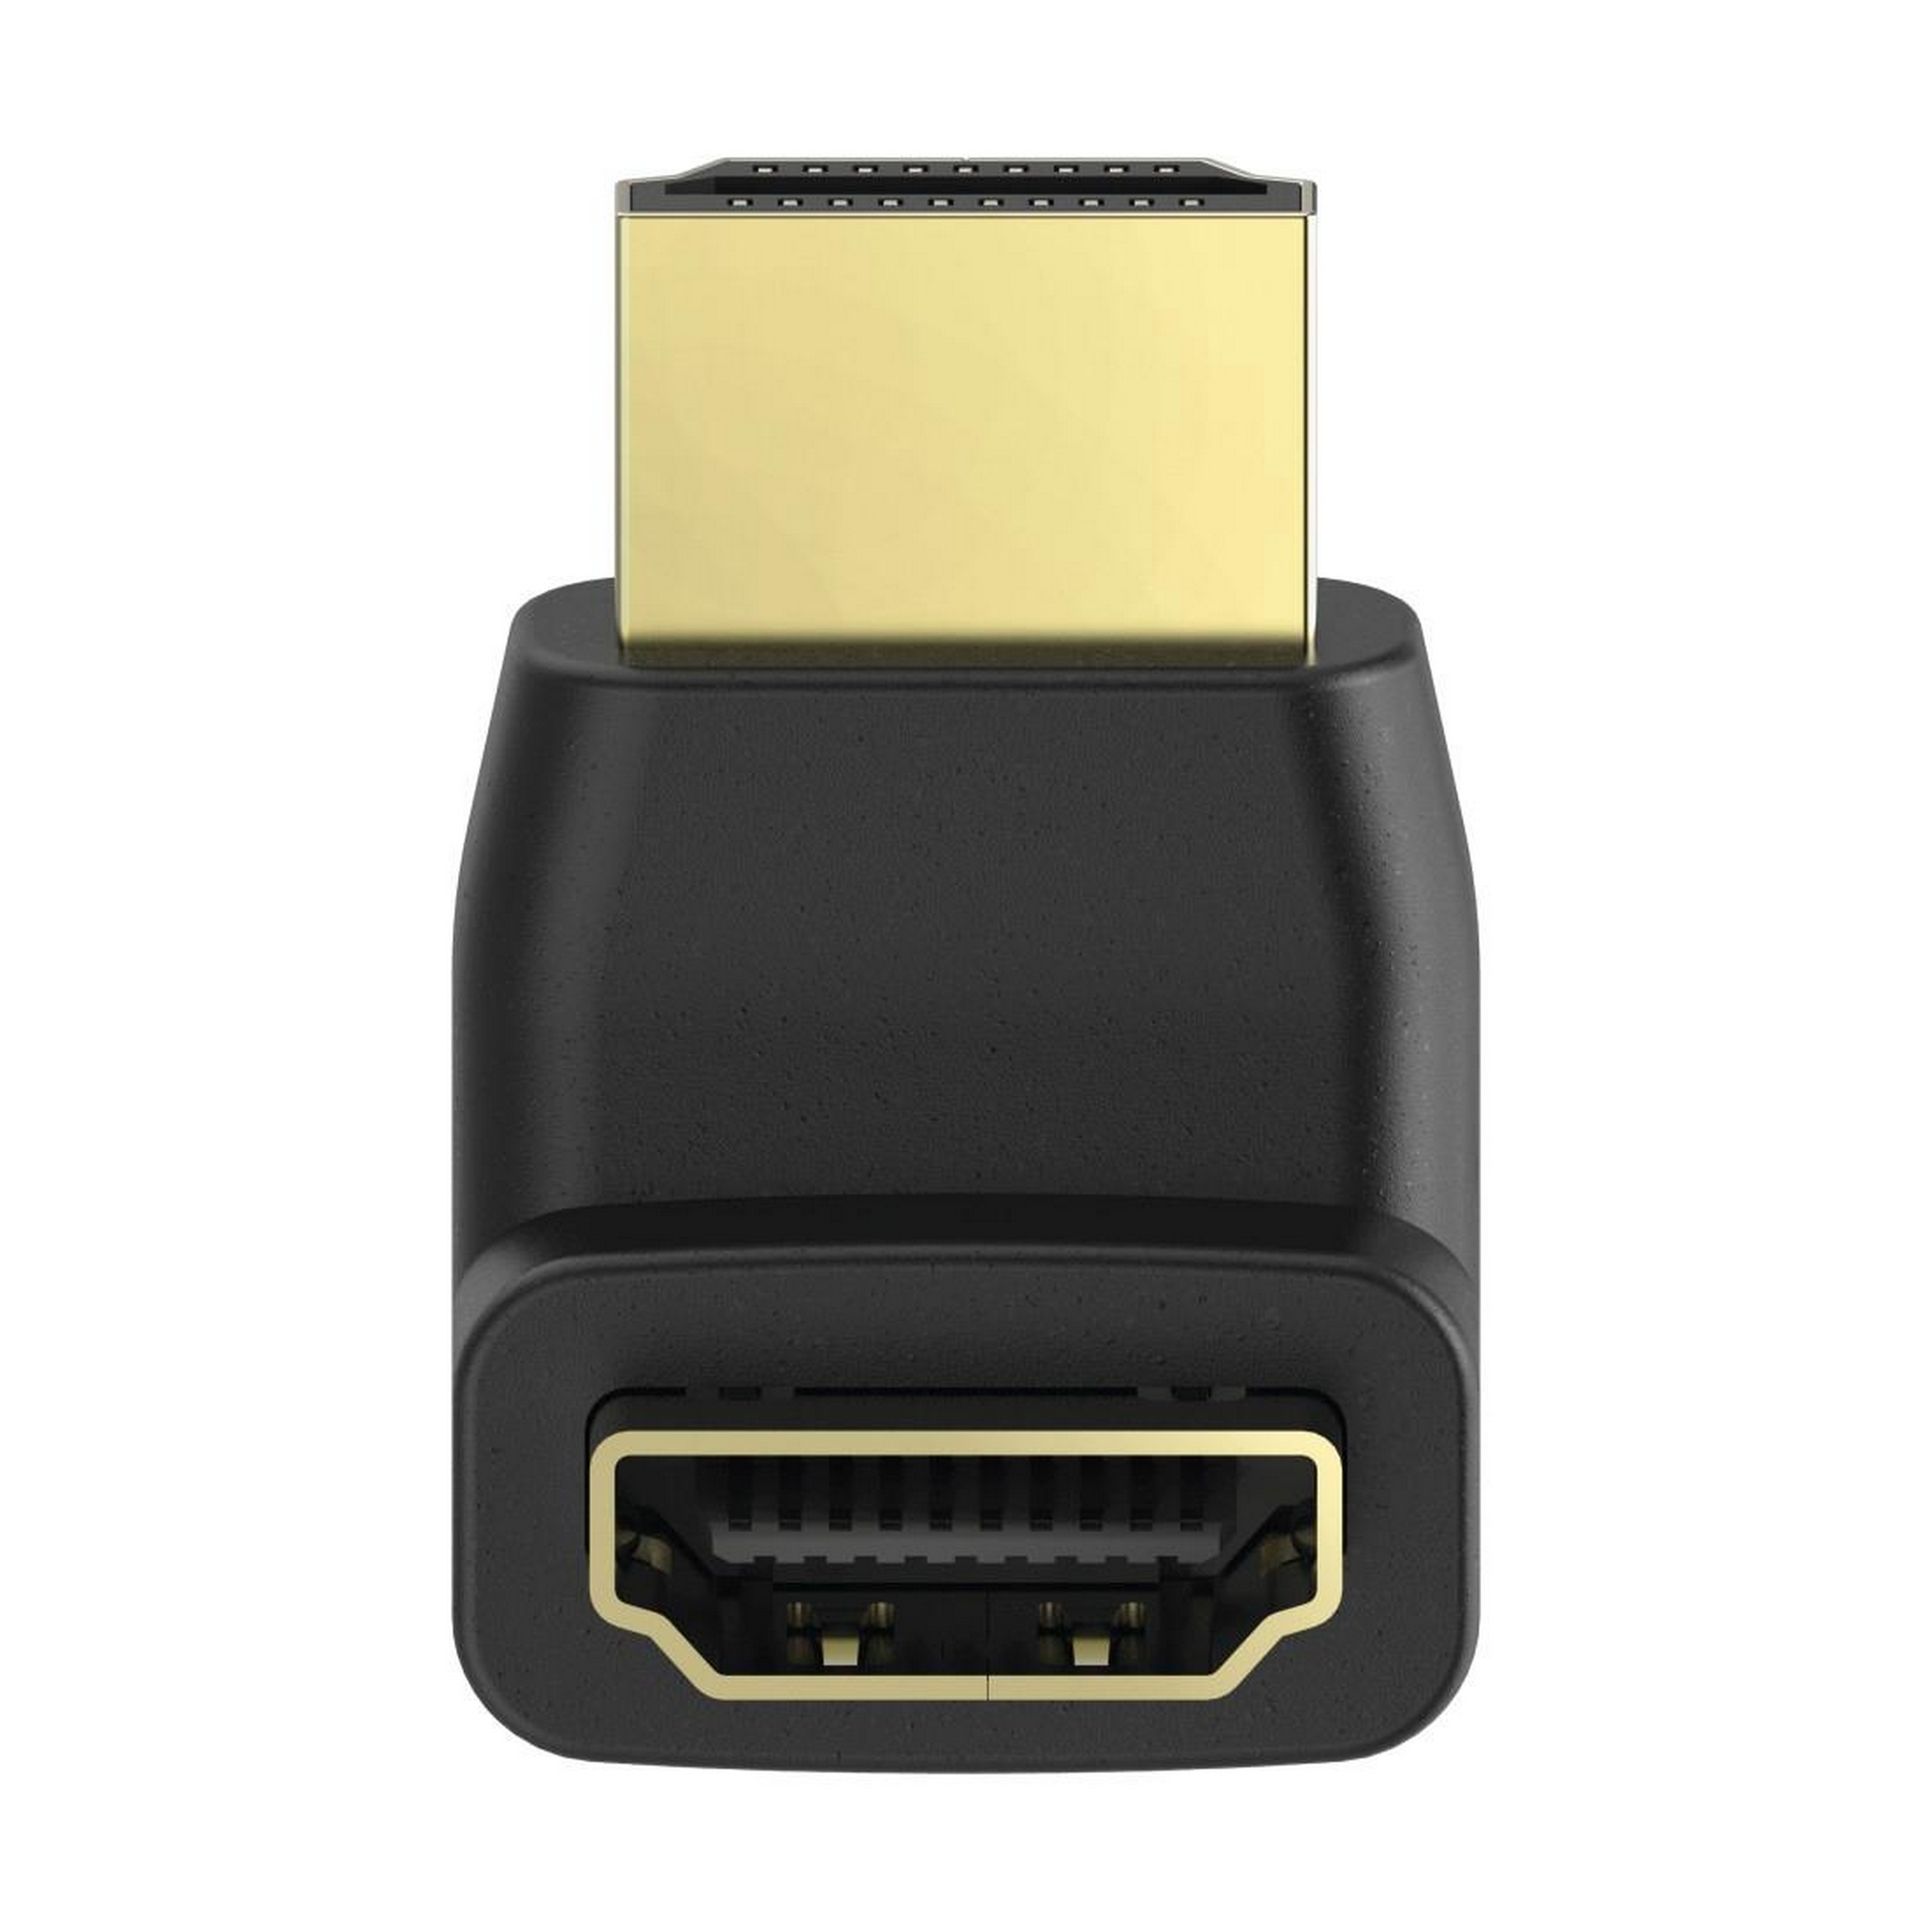 Winkeladapter High-Speed-HDMI-Kupplung 90° + product picture